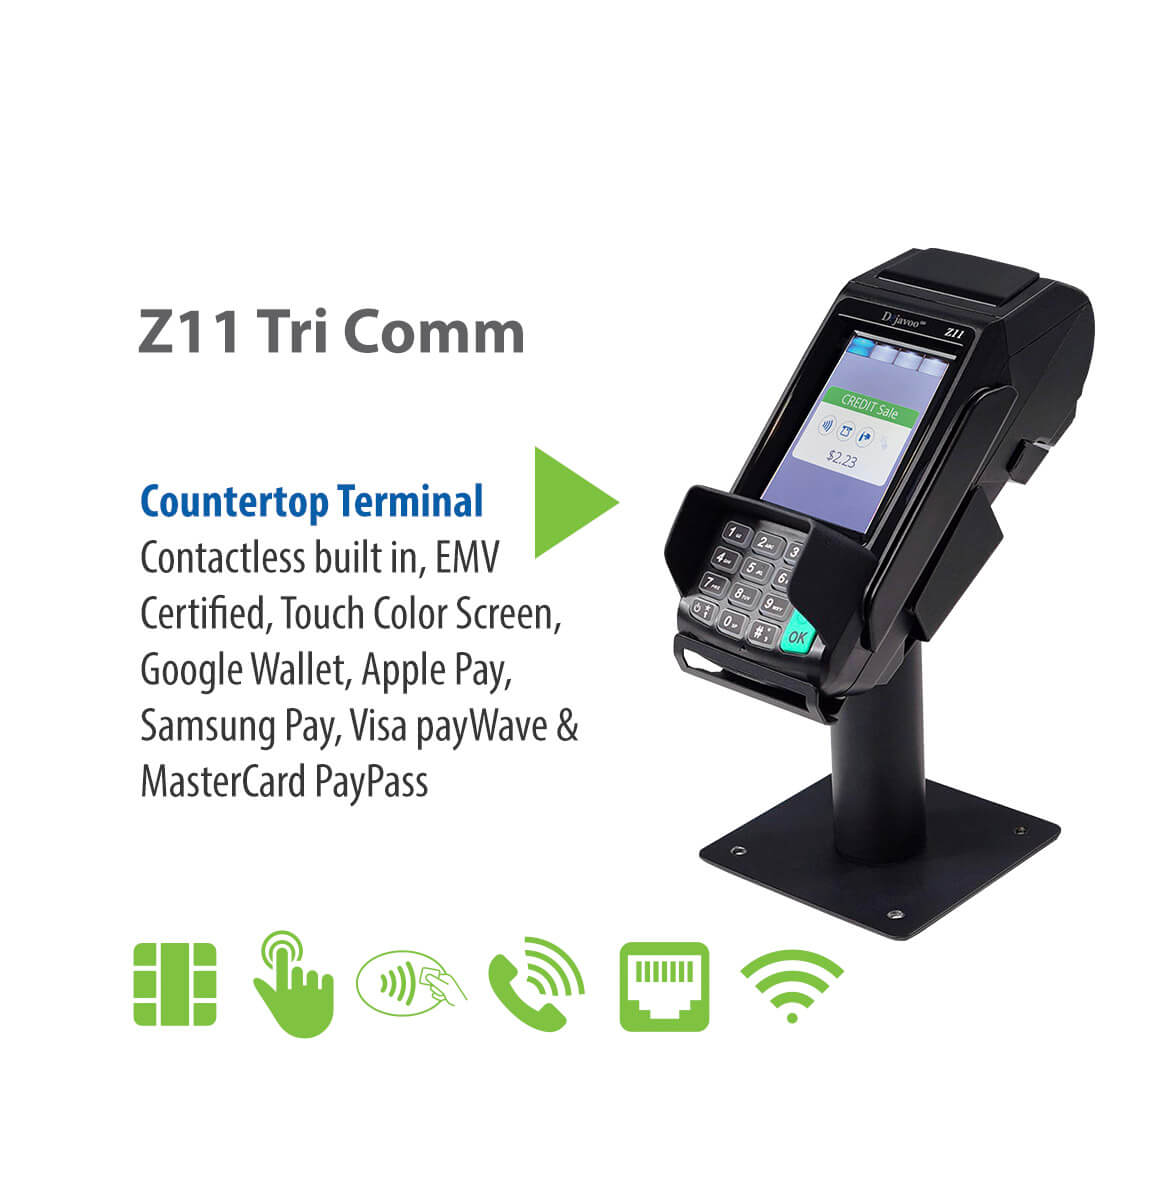 Z11 Tri Comm Countertop Terminal with Contactless built in, EMV Certified, Touch Color Screen, Google Wallet, Apply Pay, Samsung Pay, Visa payWave & MasterCard PayPass